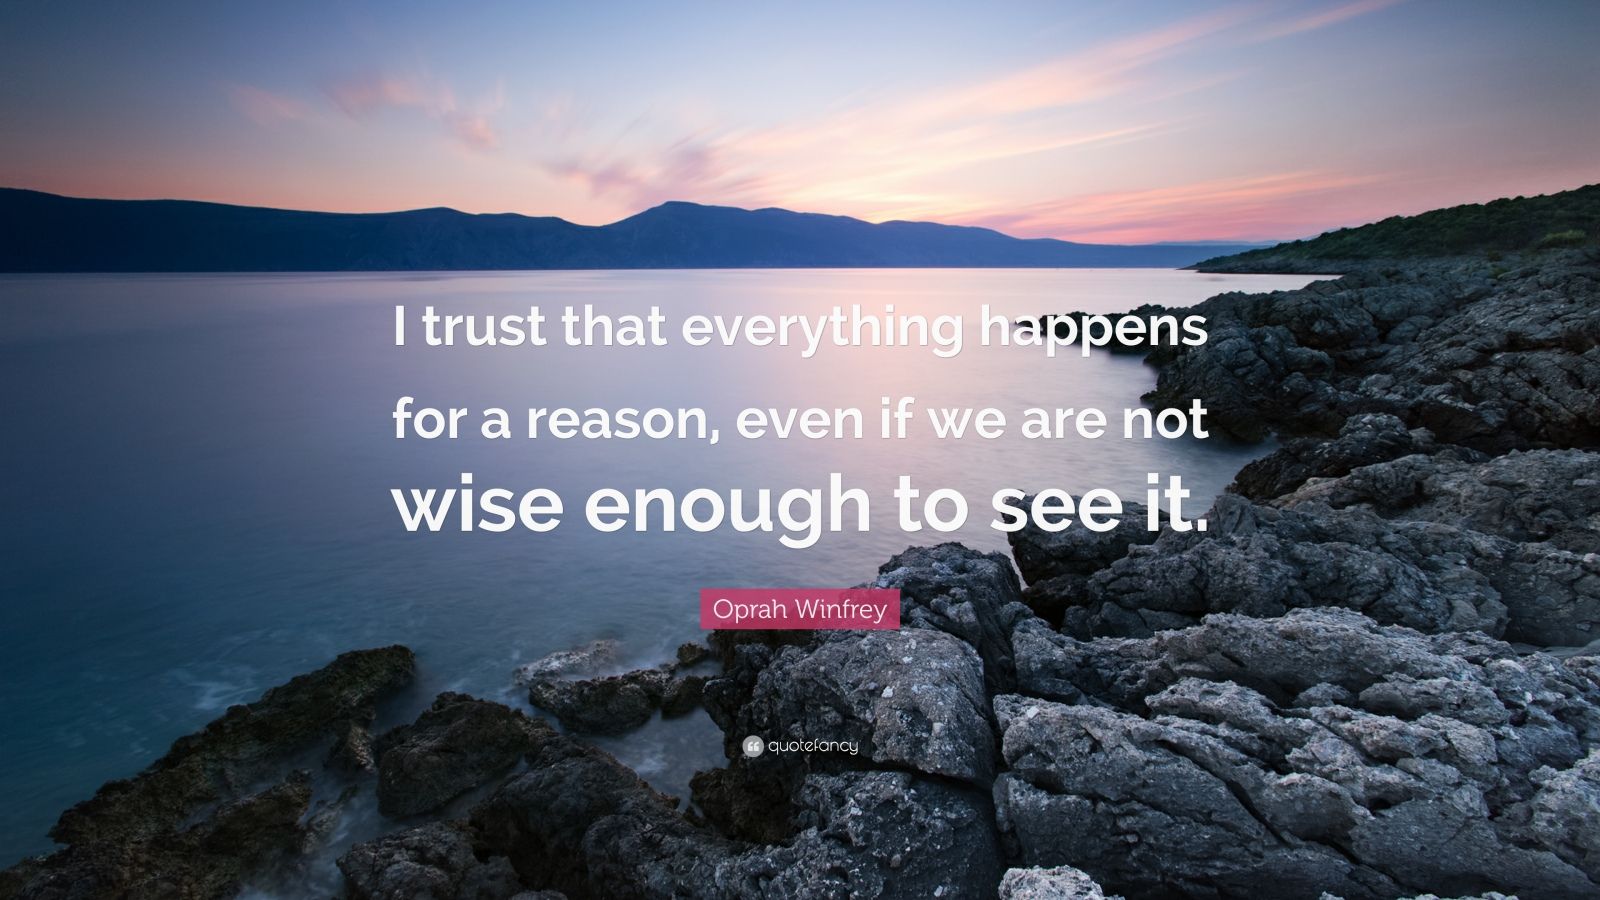 We Believe That Everything Happens for a Reason!